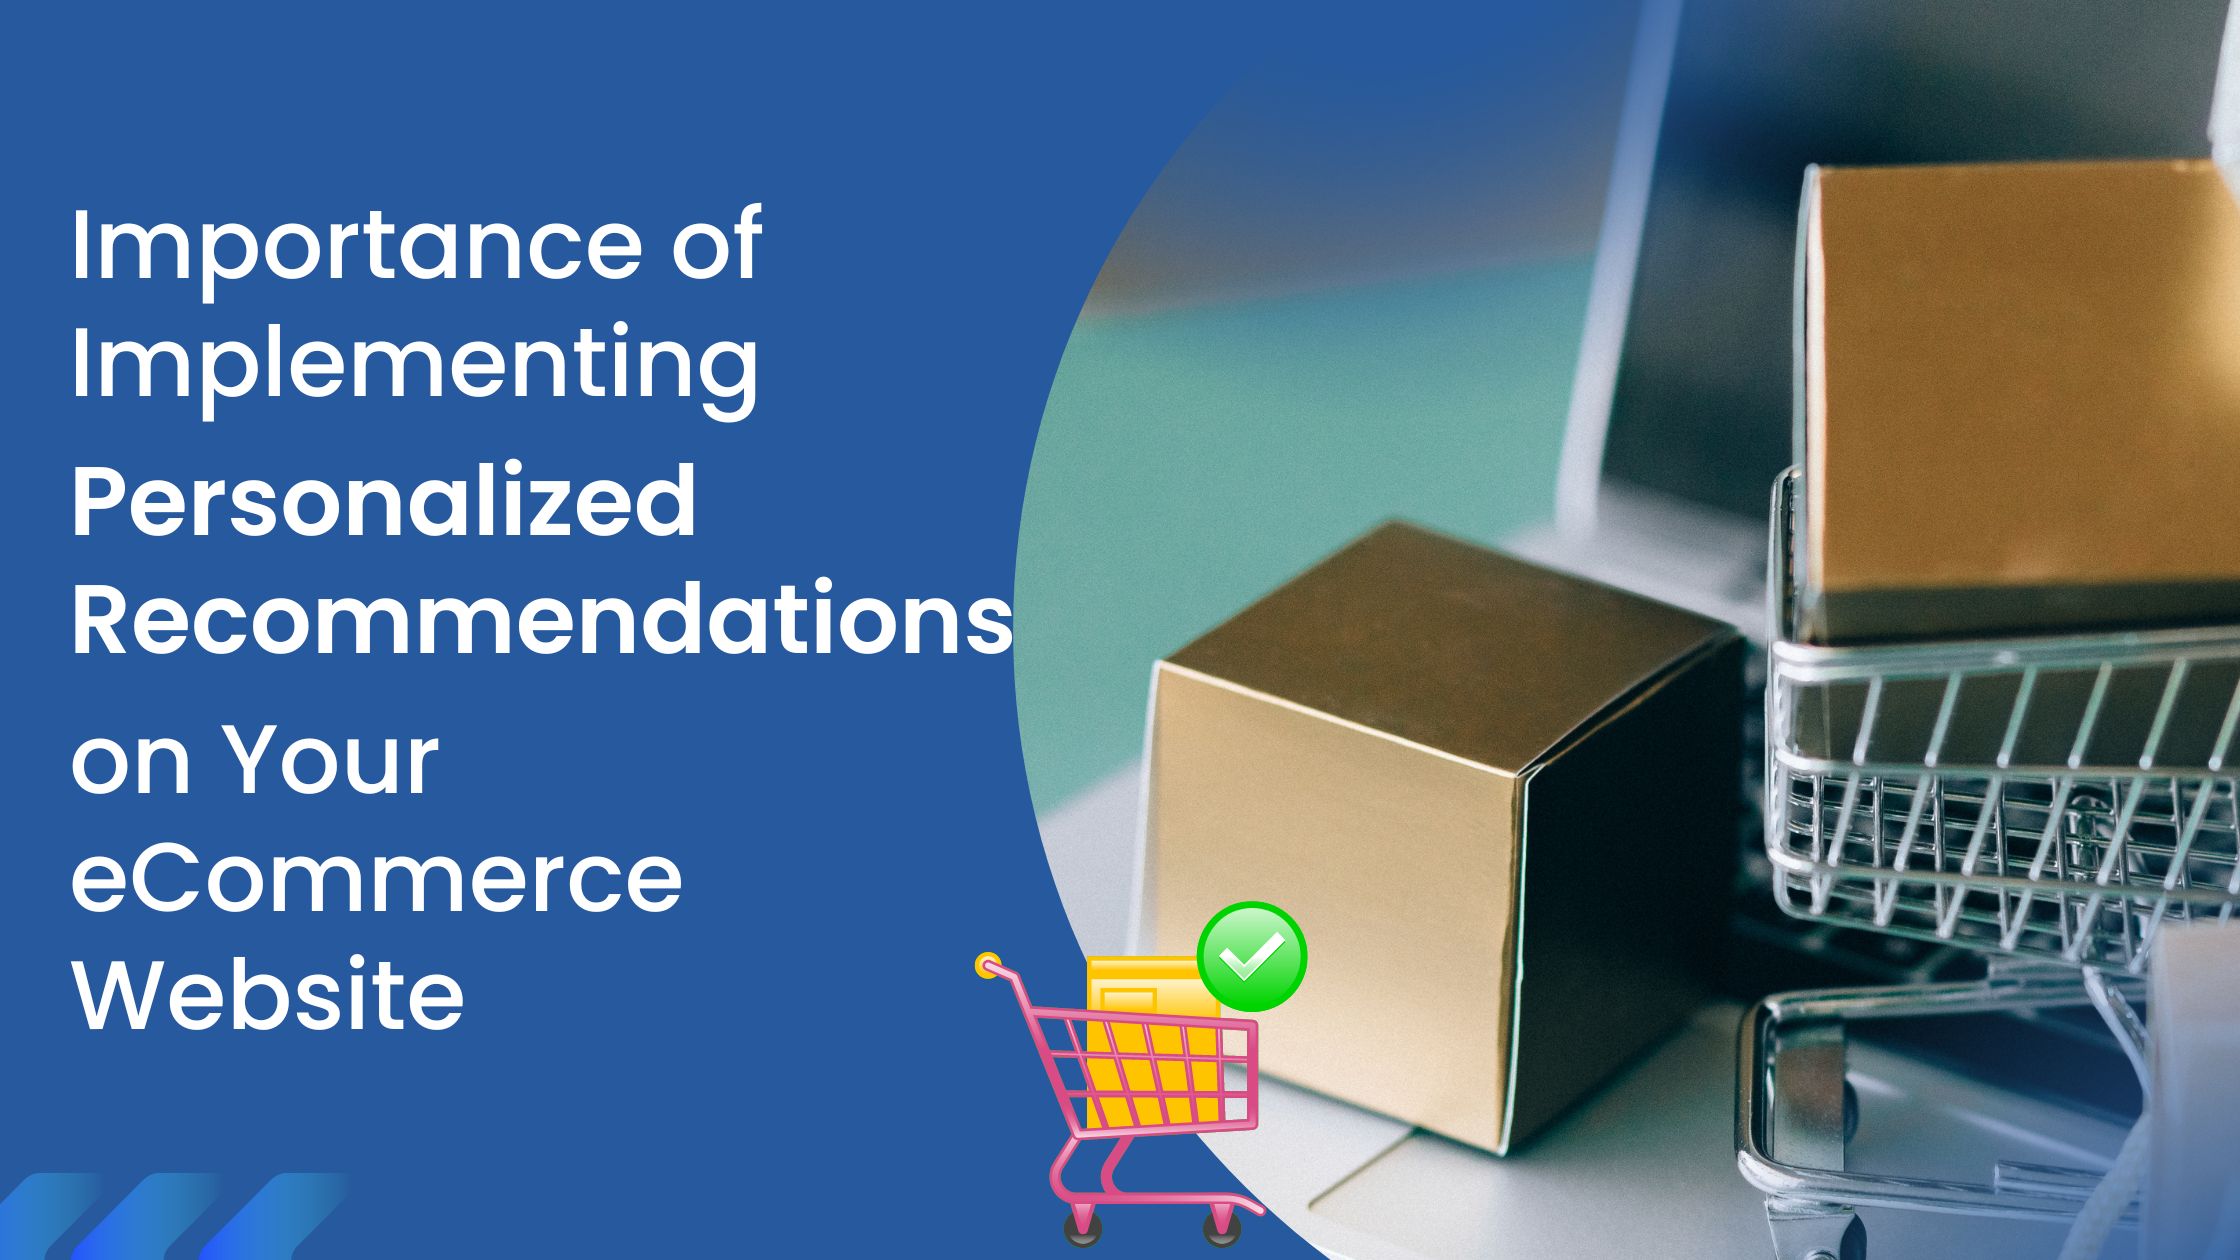 Implementing Personalized Recommendations on eCommerce Website